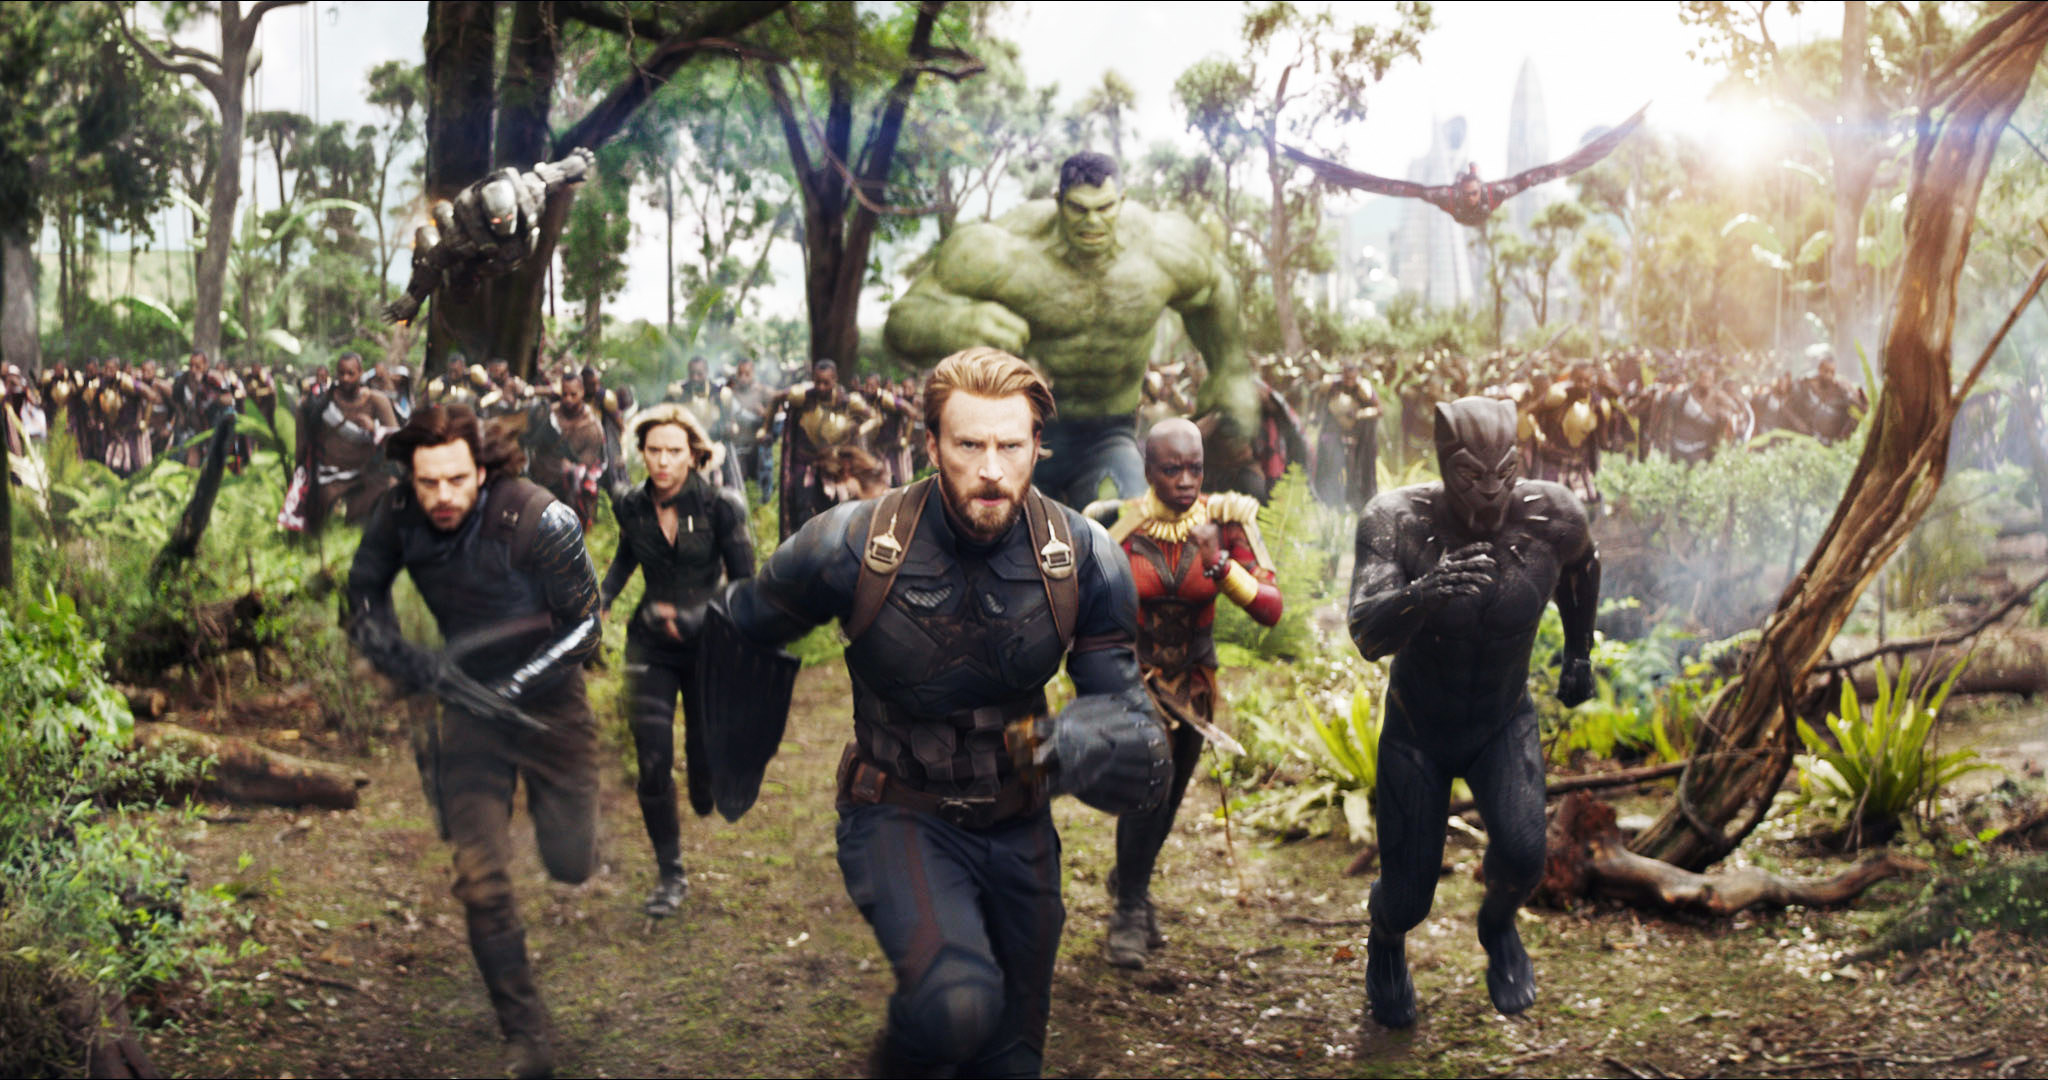 The Avengers run into battle, led by Bucky, Captain America, and Black Panther